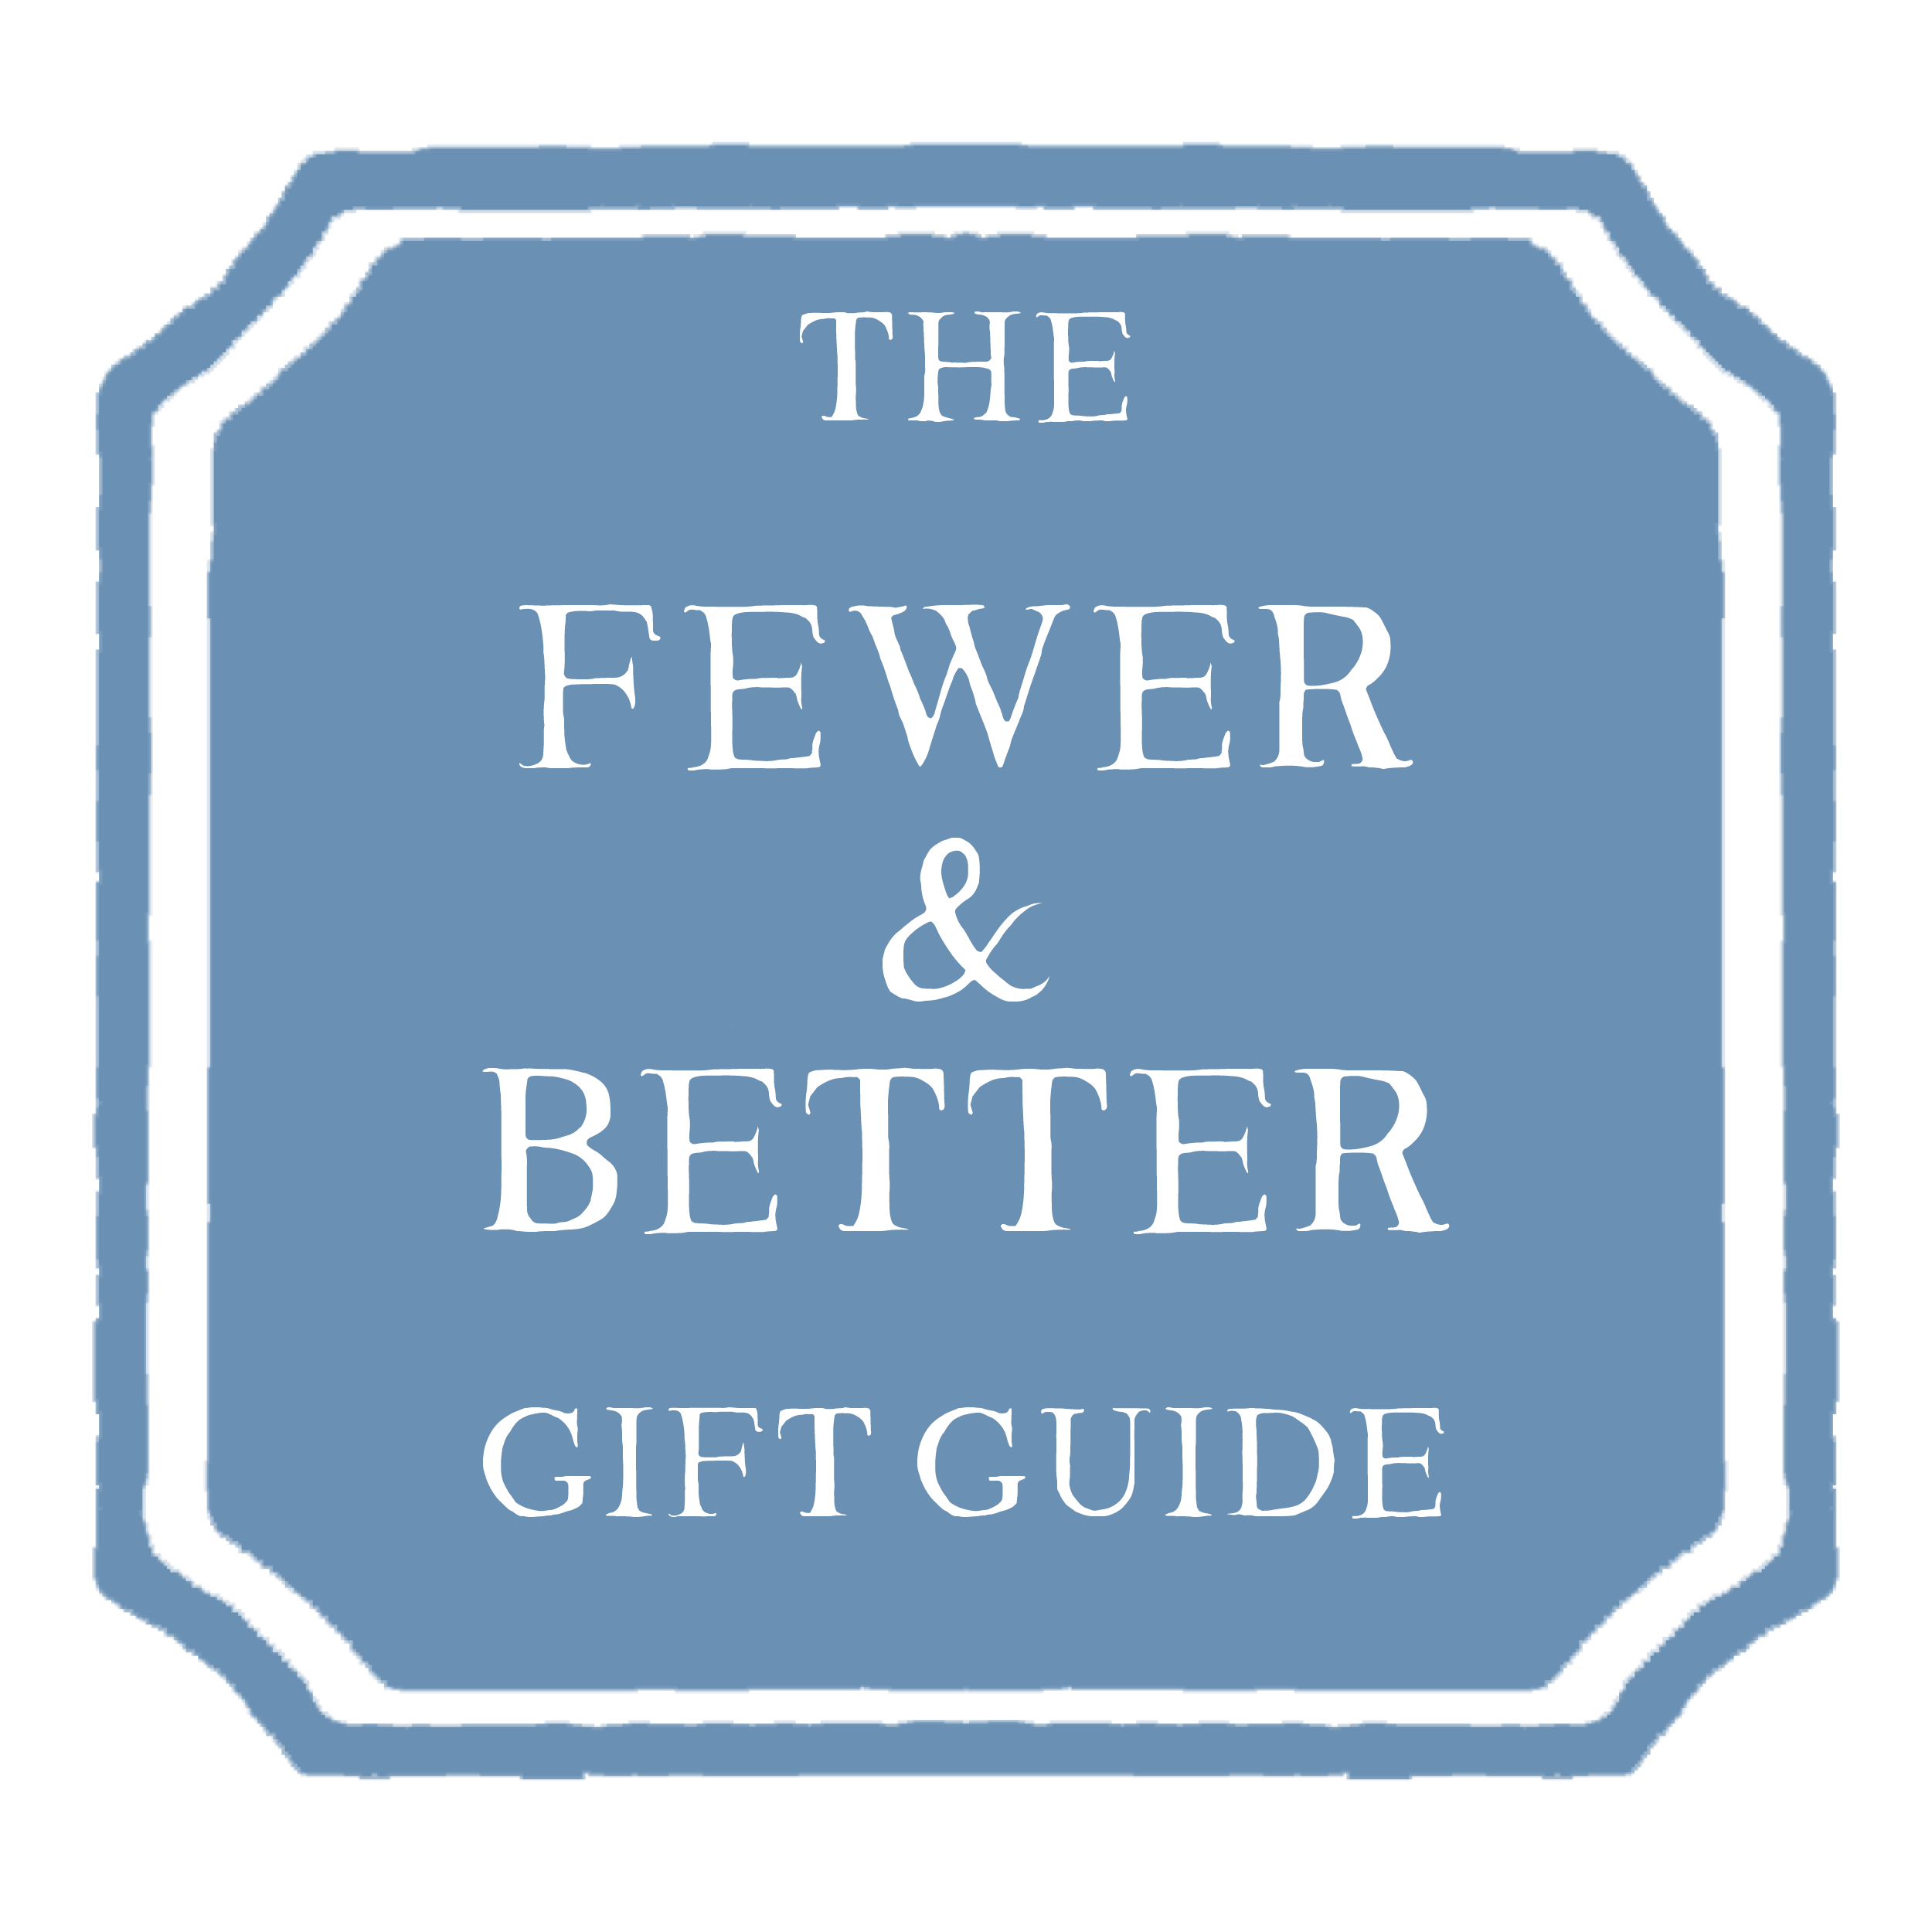 The Fewer & Better Gift Guide